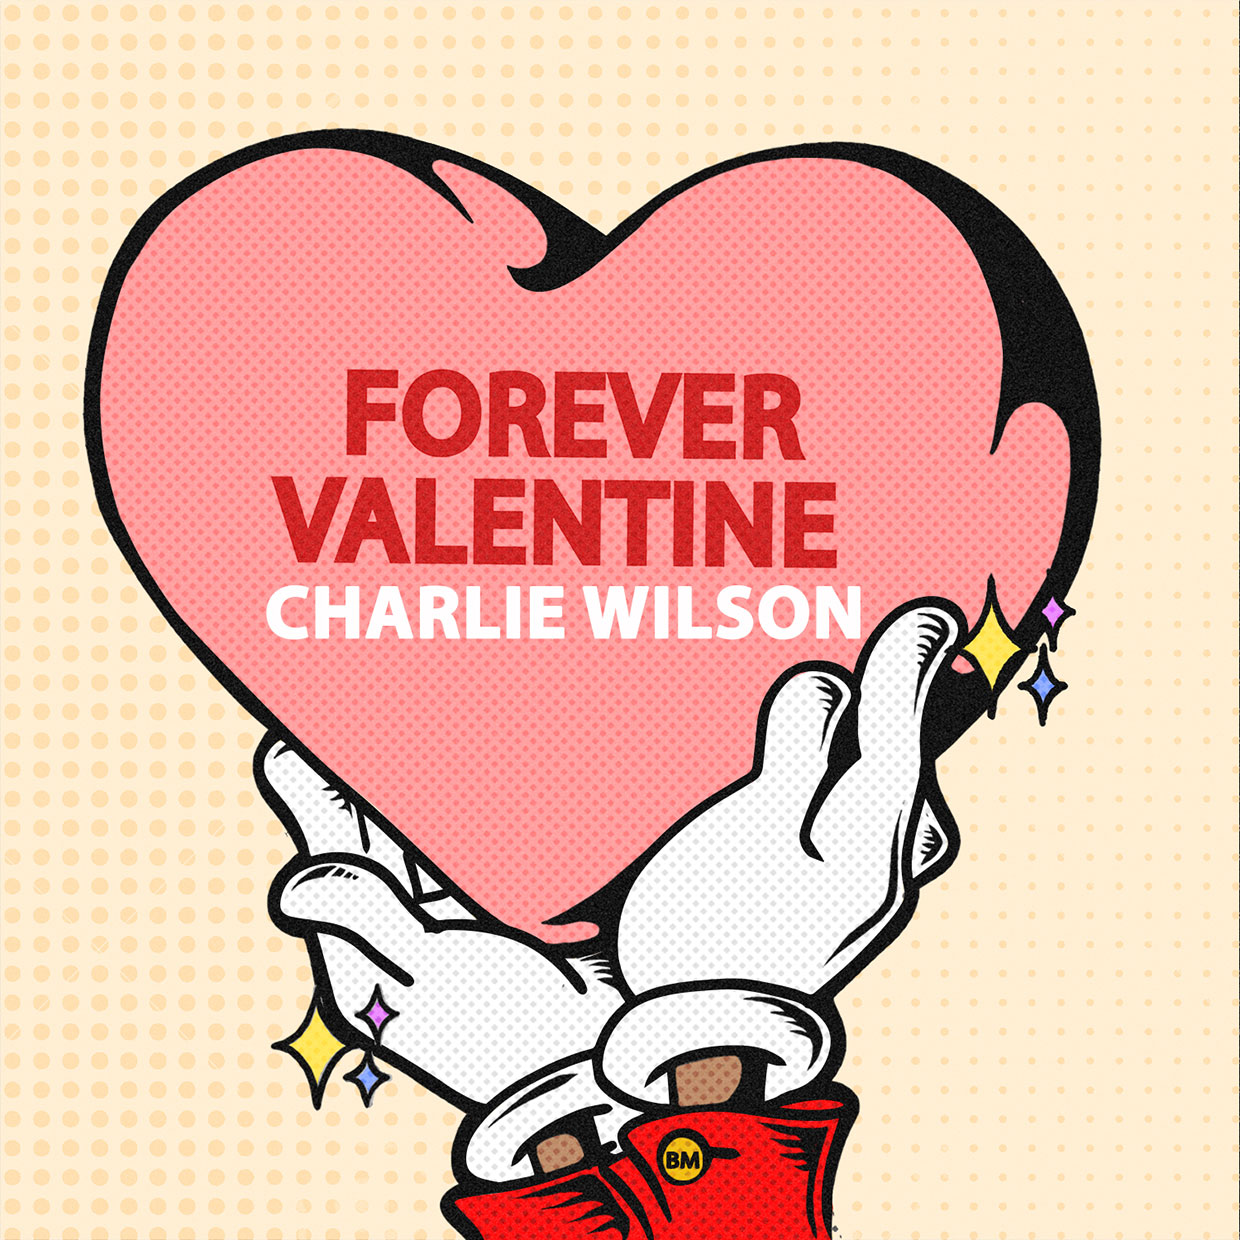 Charlie Wilson Celebrates Love of All Ages in “Forever Valentine” Video